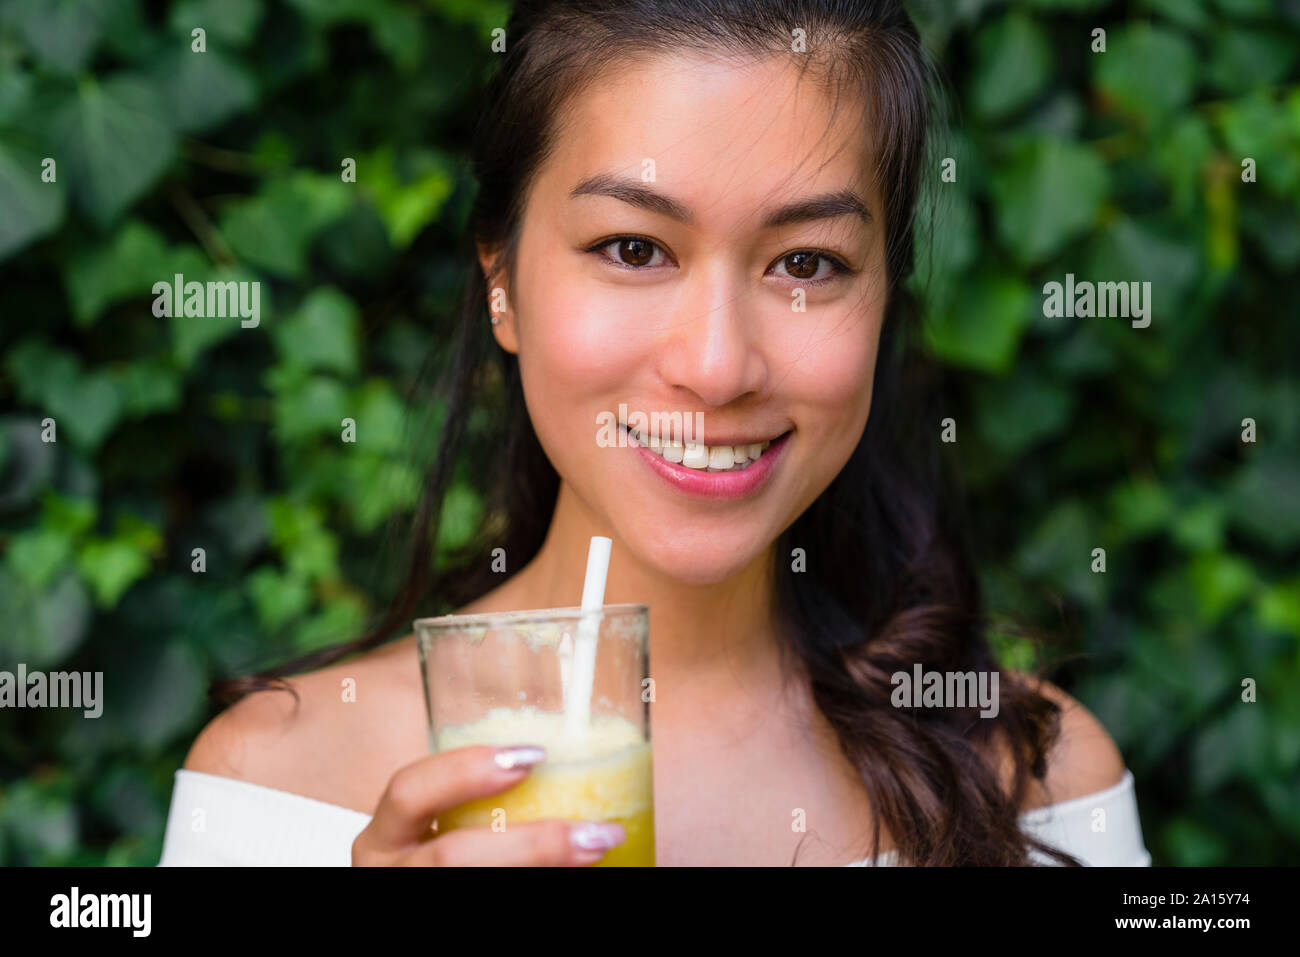 Portrait of smiling young woman holding a healthy drink Stock Photo